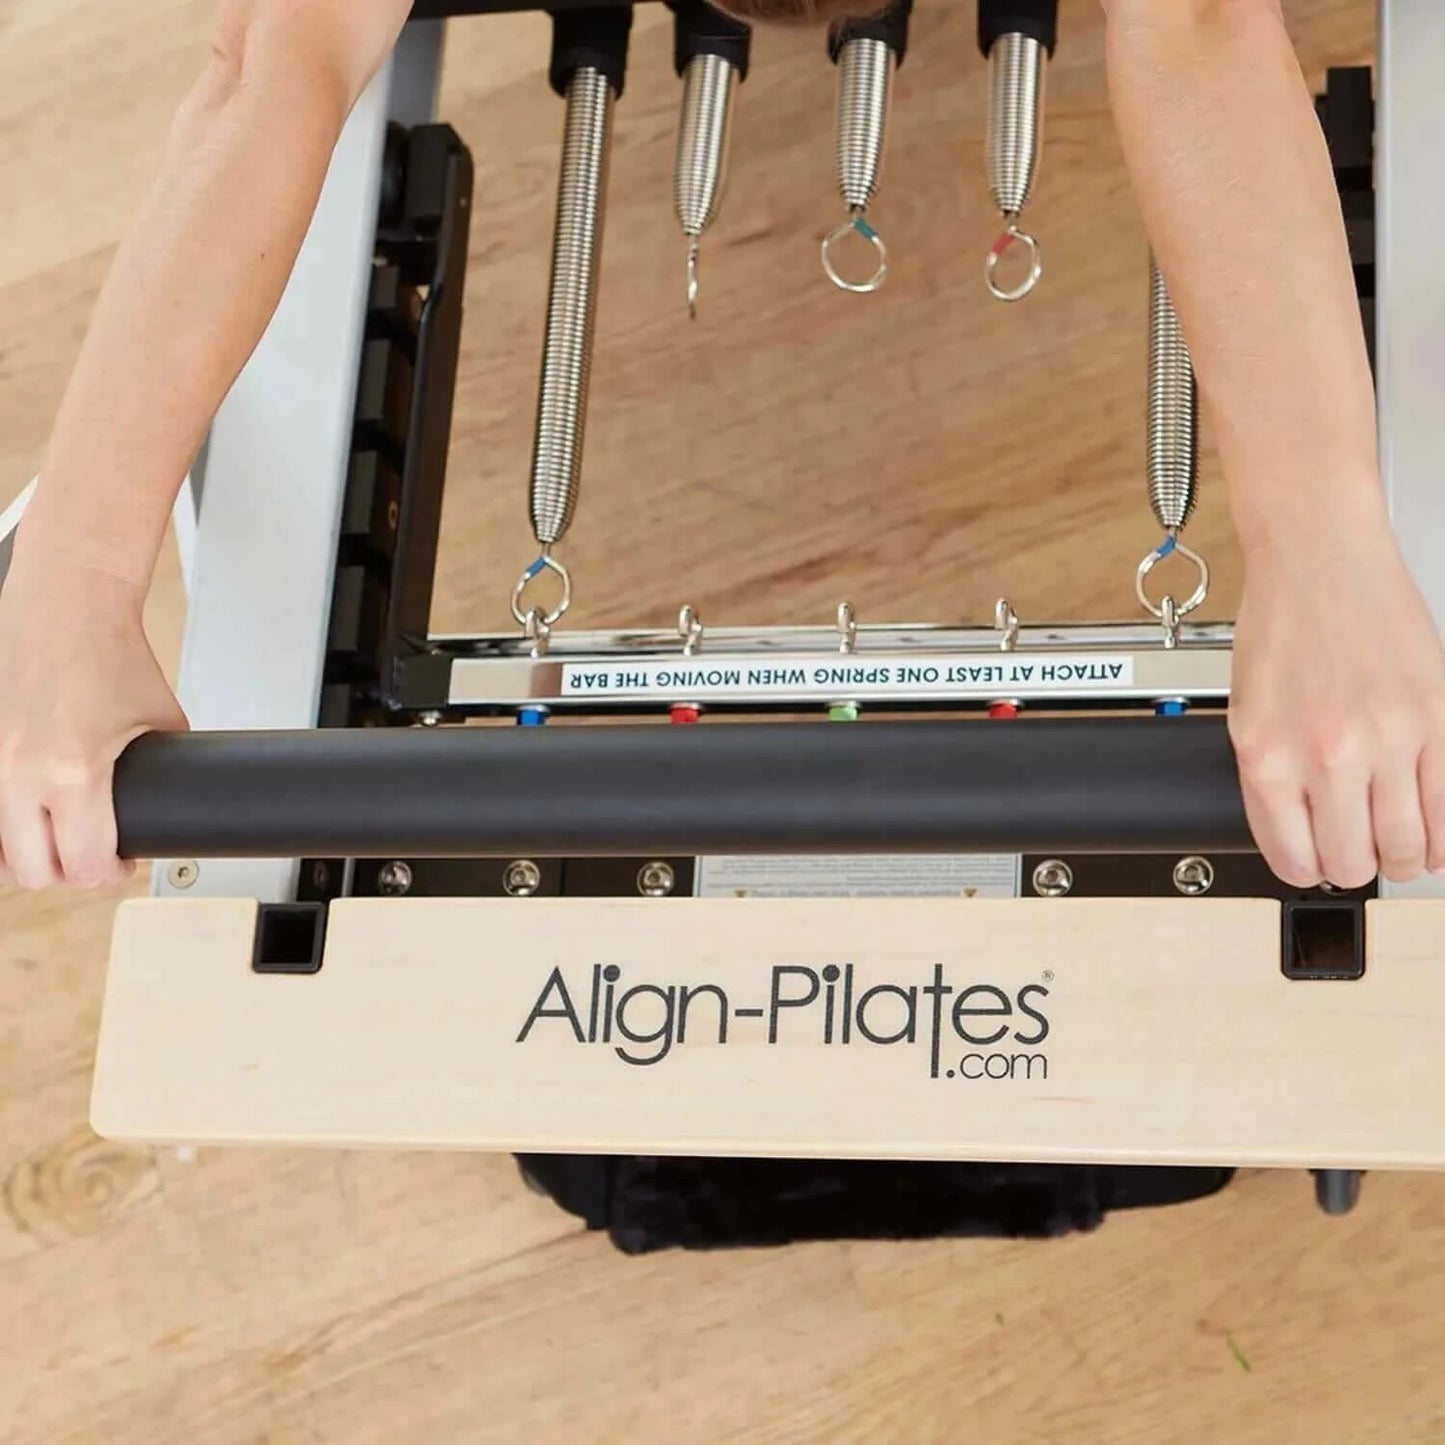  Align Pilates Blue Light Spring 47cm For Reformer & Cadillac by Align Pilates sold by Pilates Matters® by BSP LLC